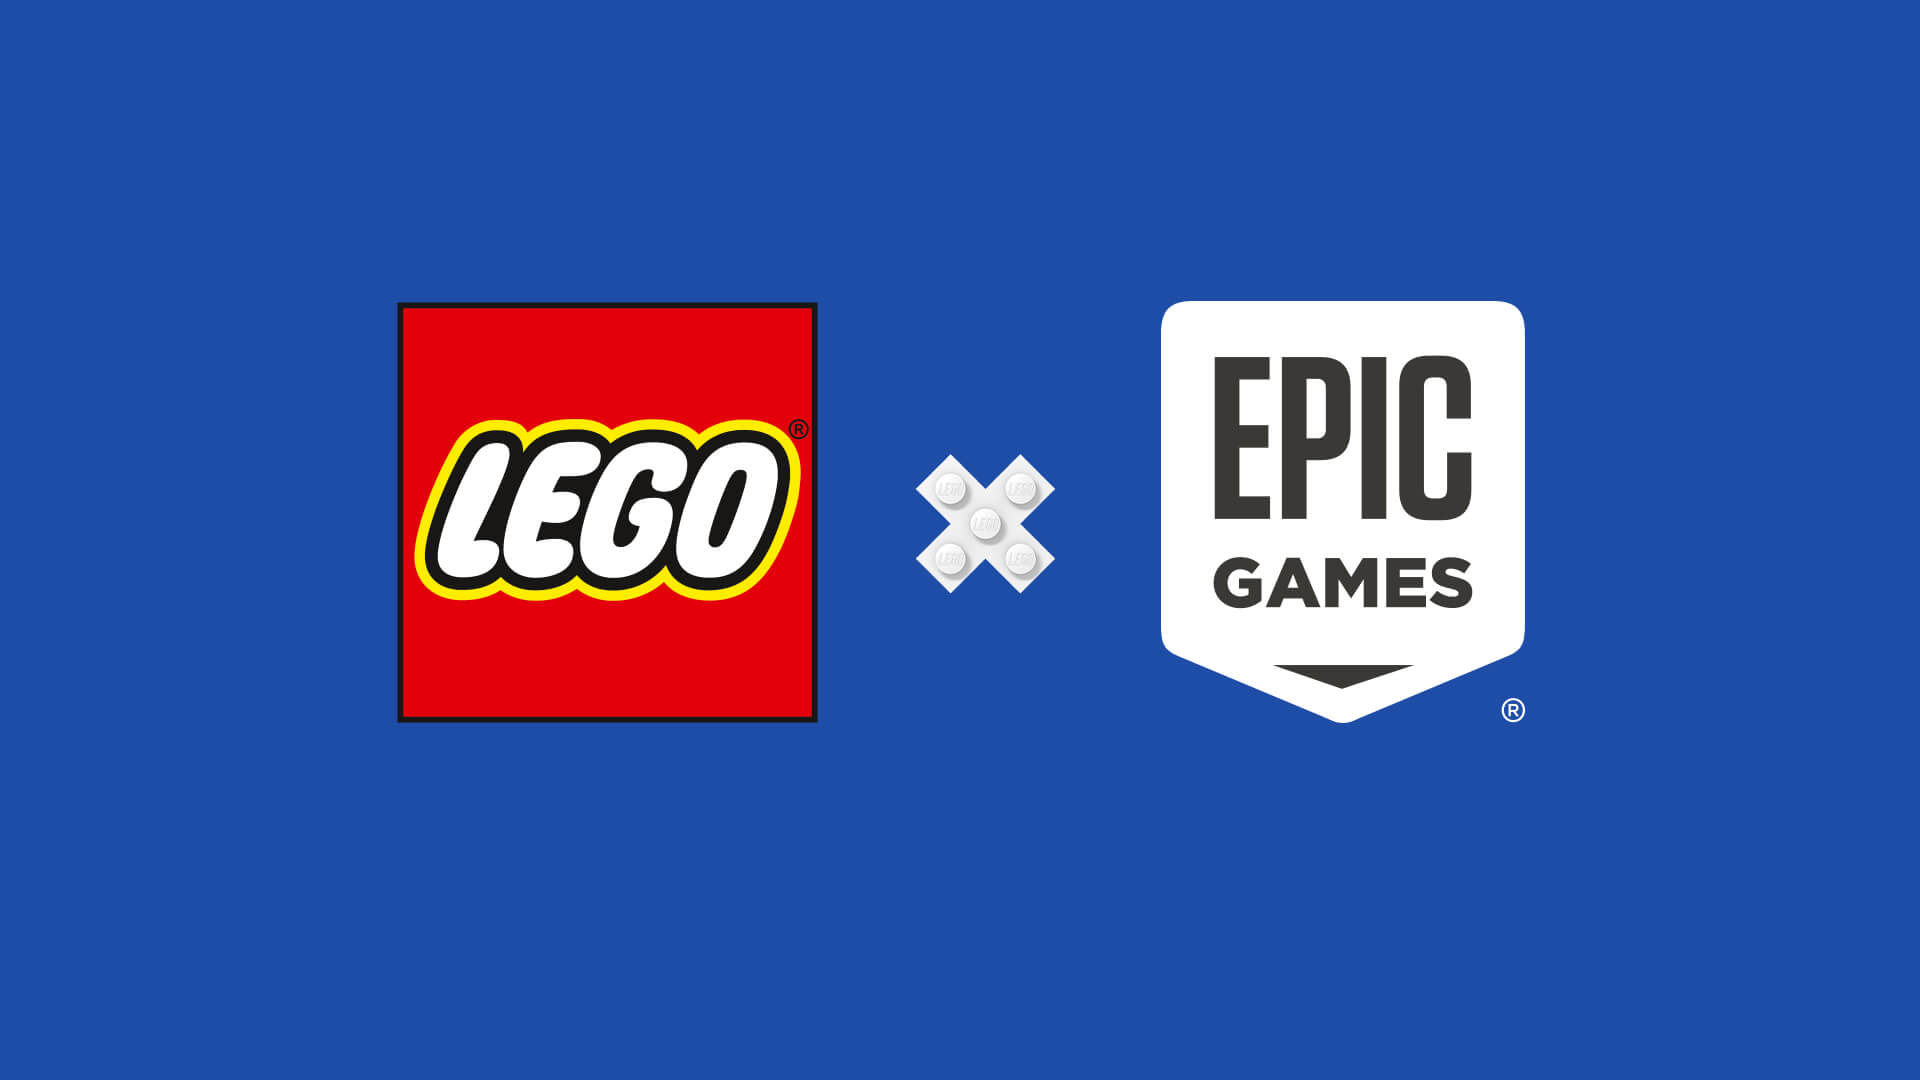 LEGO and Epic Games announce partnership to create a “family-friendly digital experience”